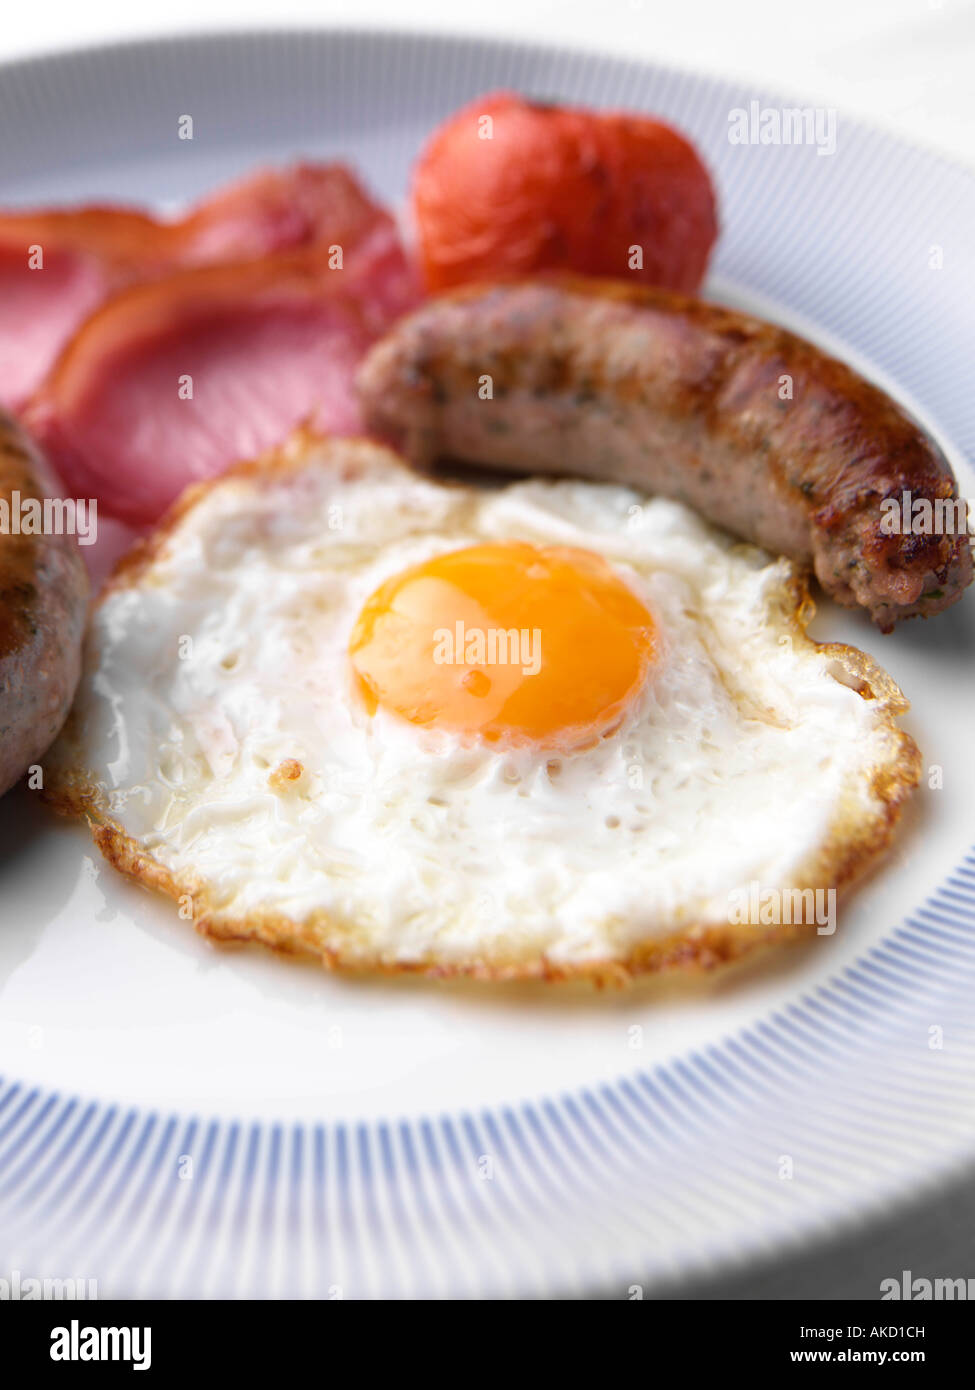 A full English cooked breakfast editorial food Stock Photo